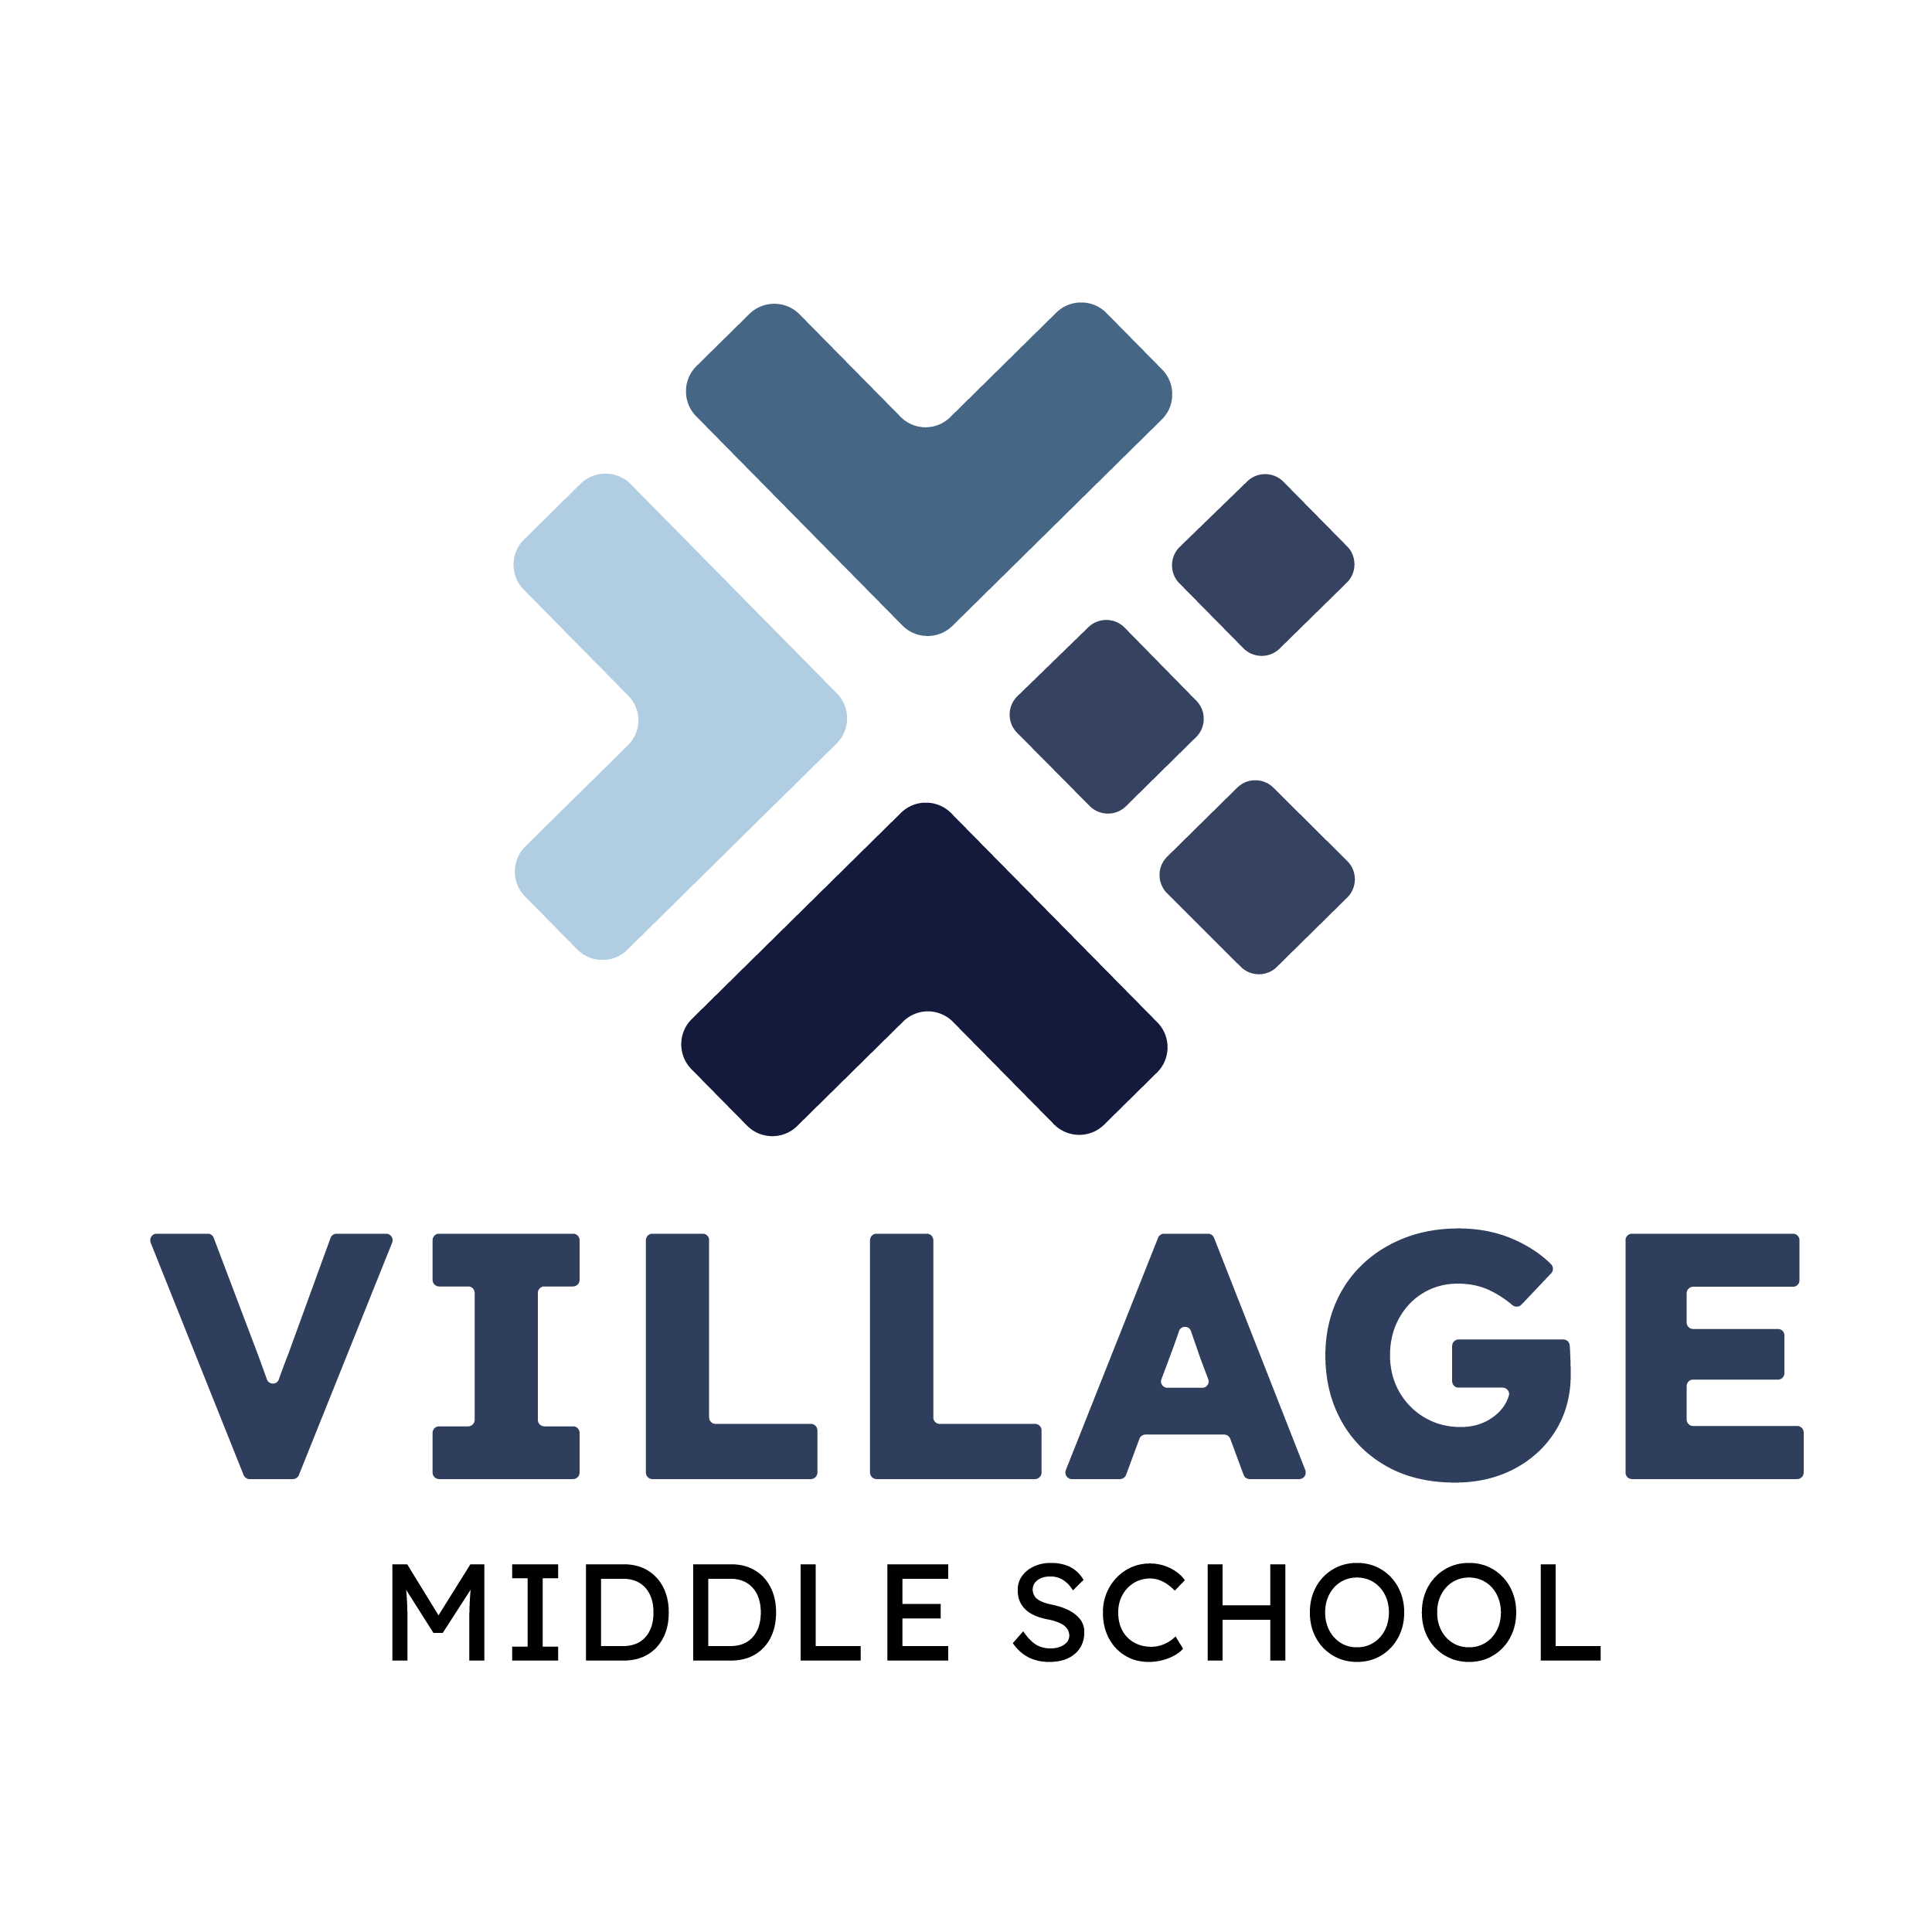 The Village Middle School Logo logo design by logo designer Neon Pig Creative for your inspiration and for the worlds largest logo competition